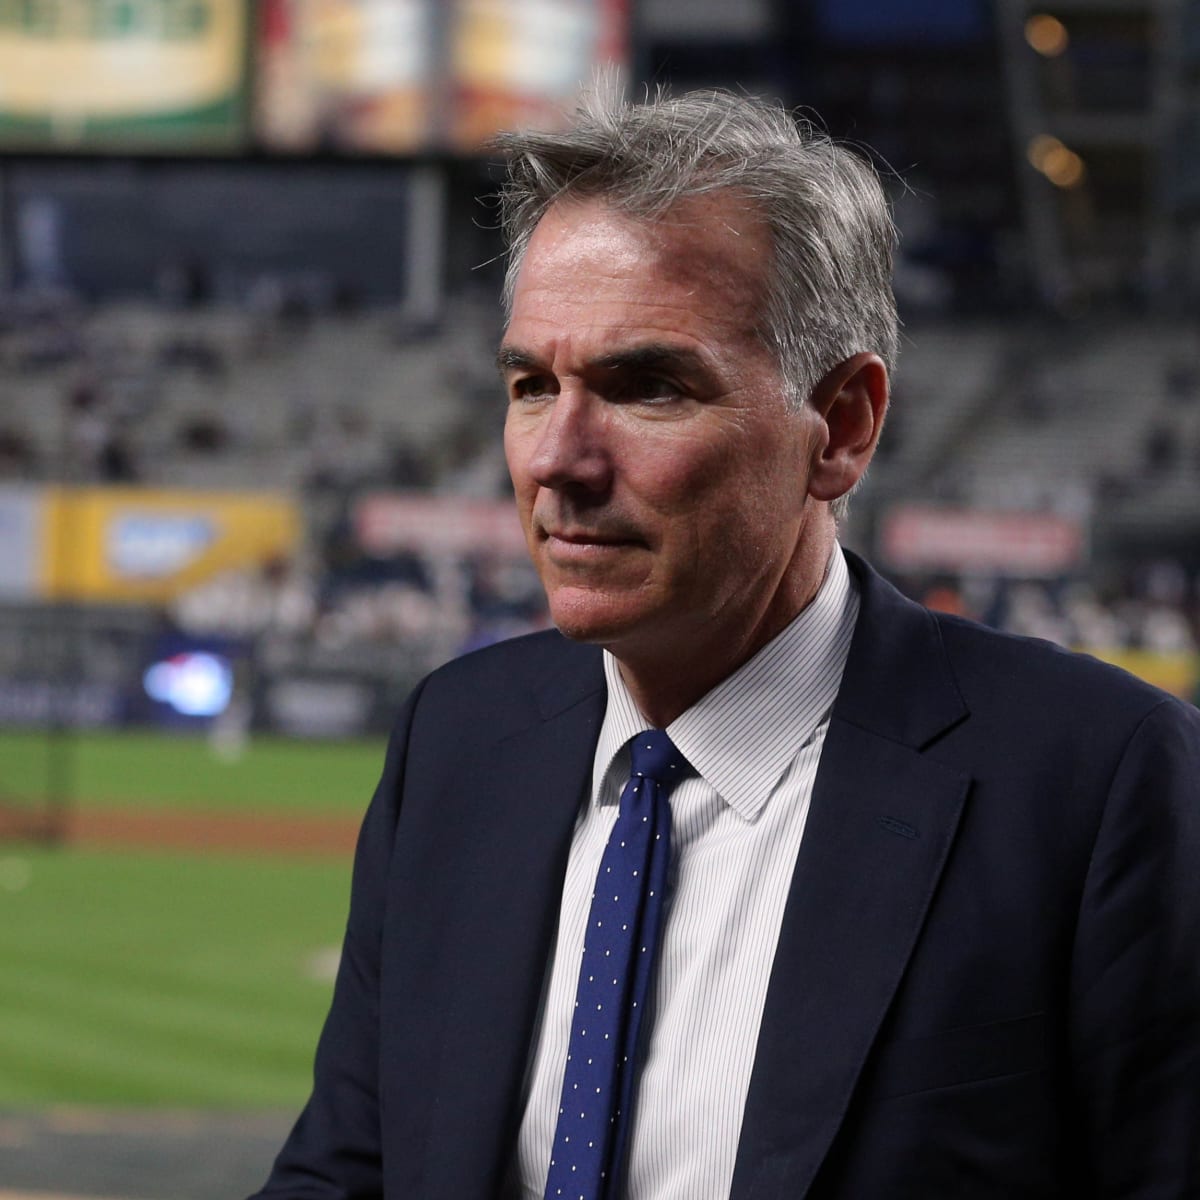 Report: Billy Beane to Leave A's, Focus on Sports Business